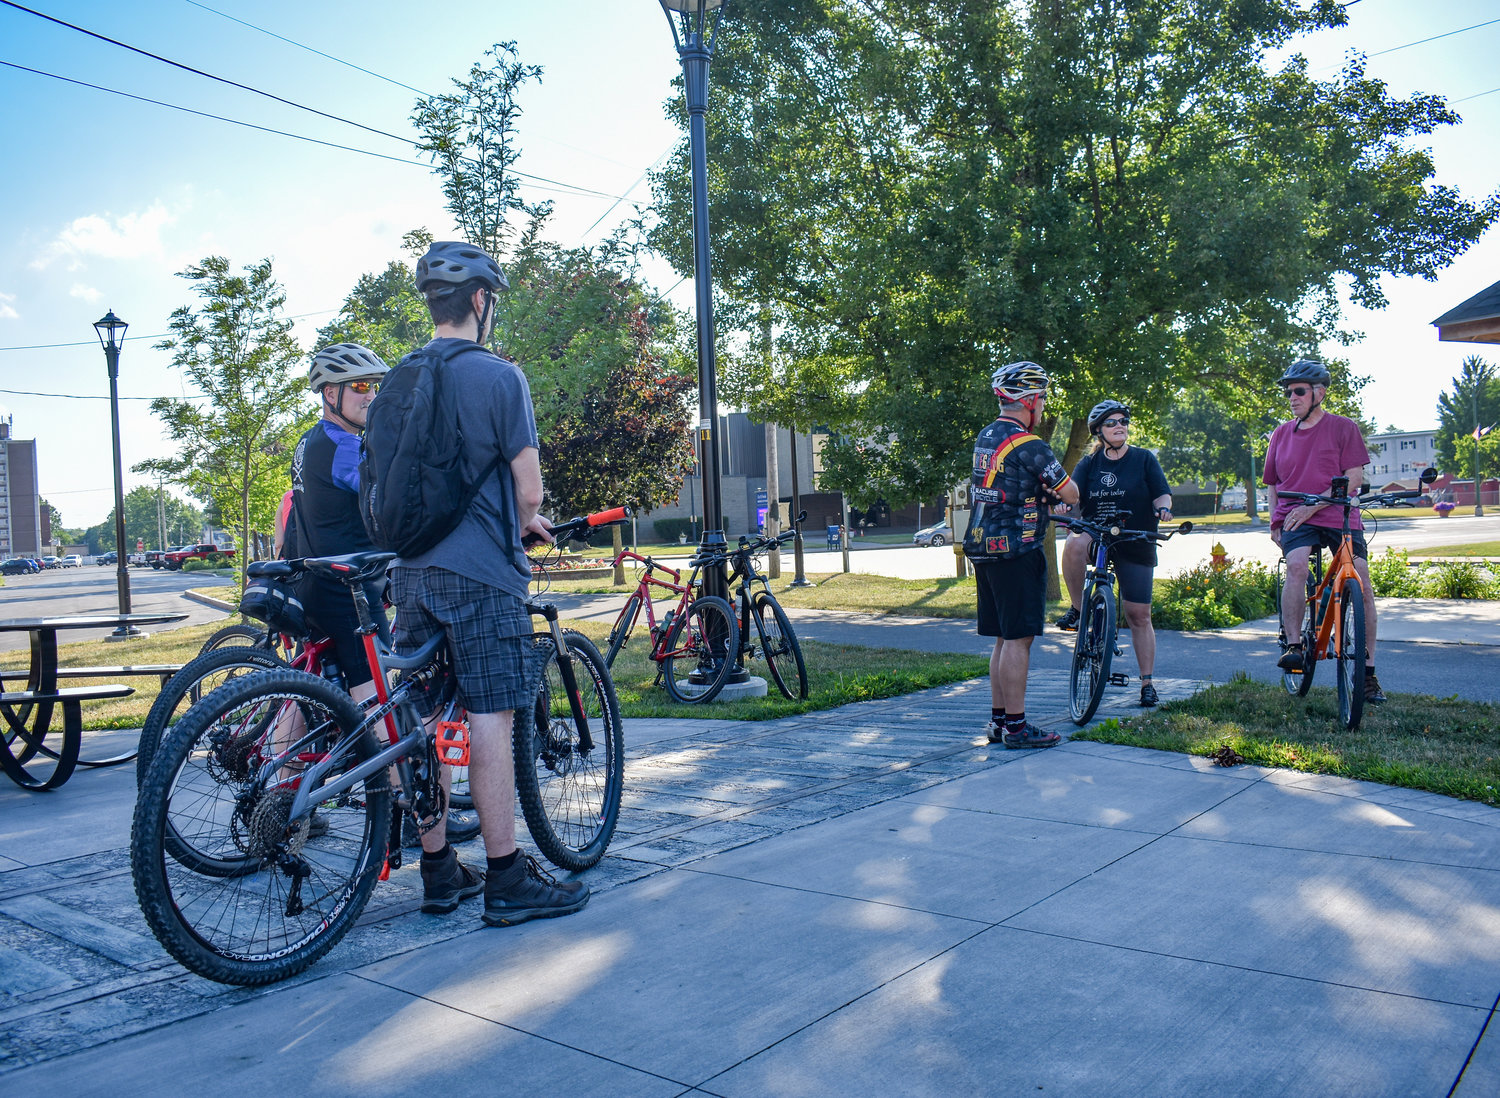 Bikers gather at the Oneida Rail Trail Pedestrian Plaza on Tuesday, July 12, 2022. Some are joining "Tuesday on the Towpath," a historic tour of the Oneida Rail Trail and Erie Canalway Trail. Others are part of a mountain biking group about to embark on their own trek.